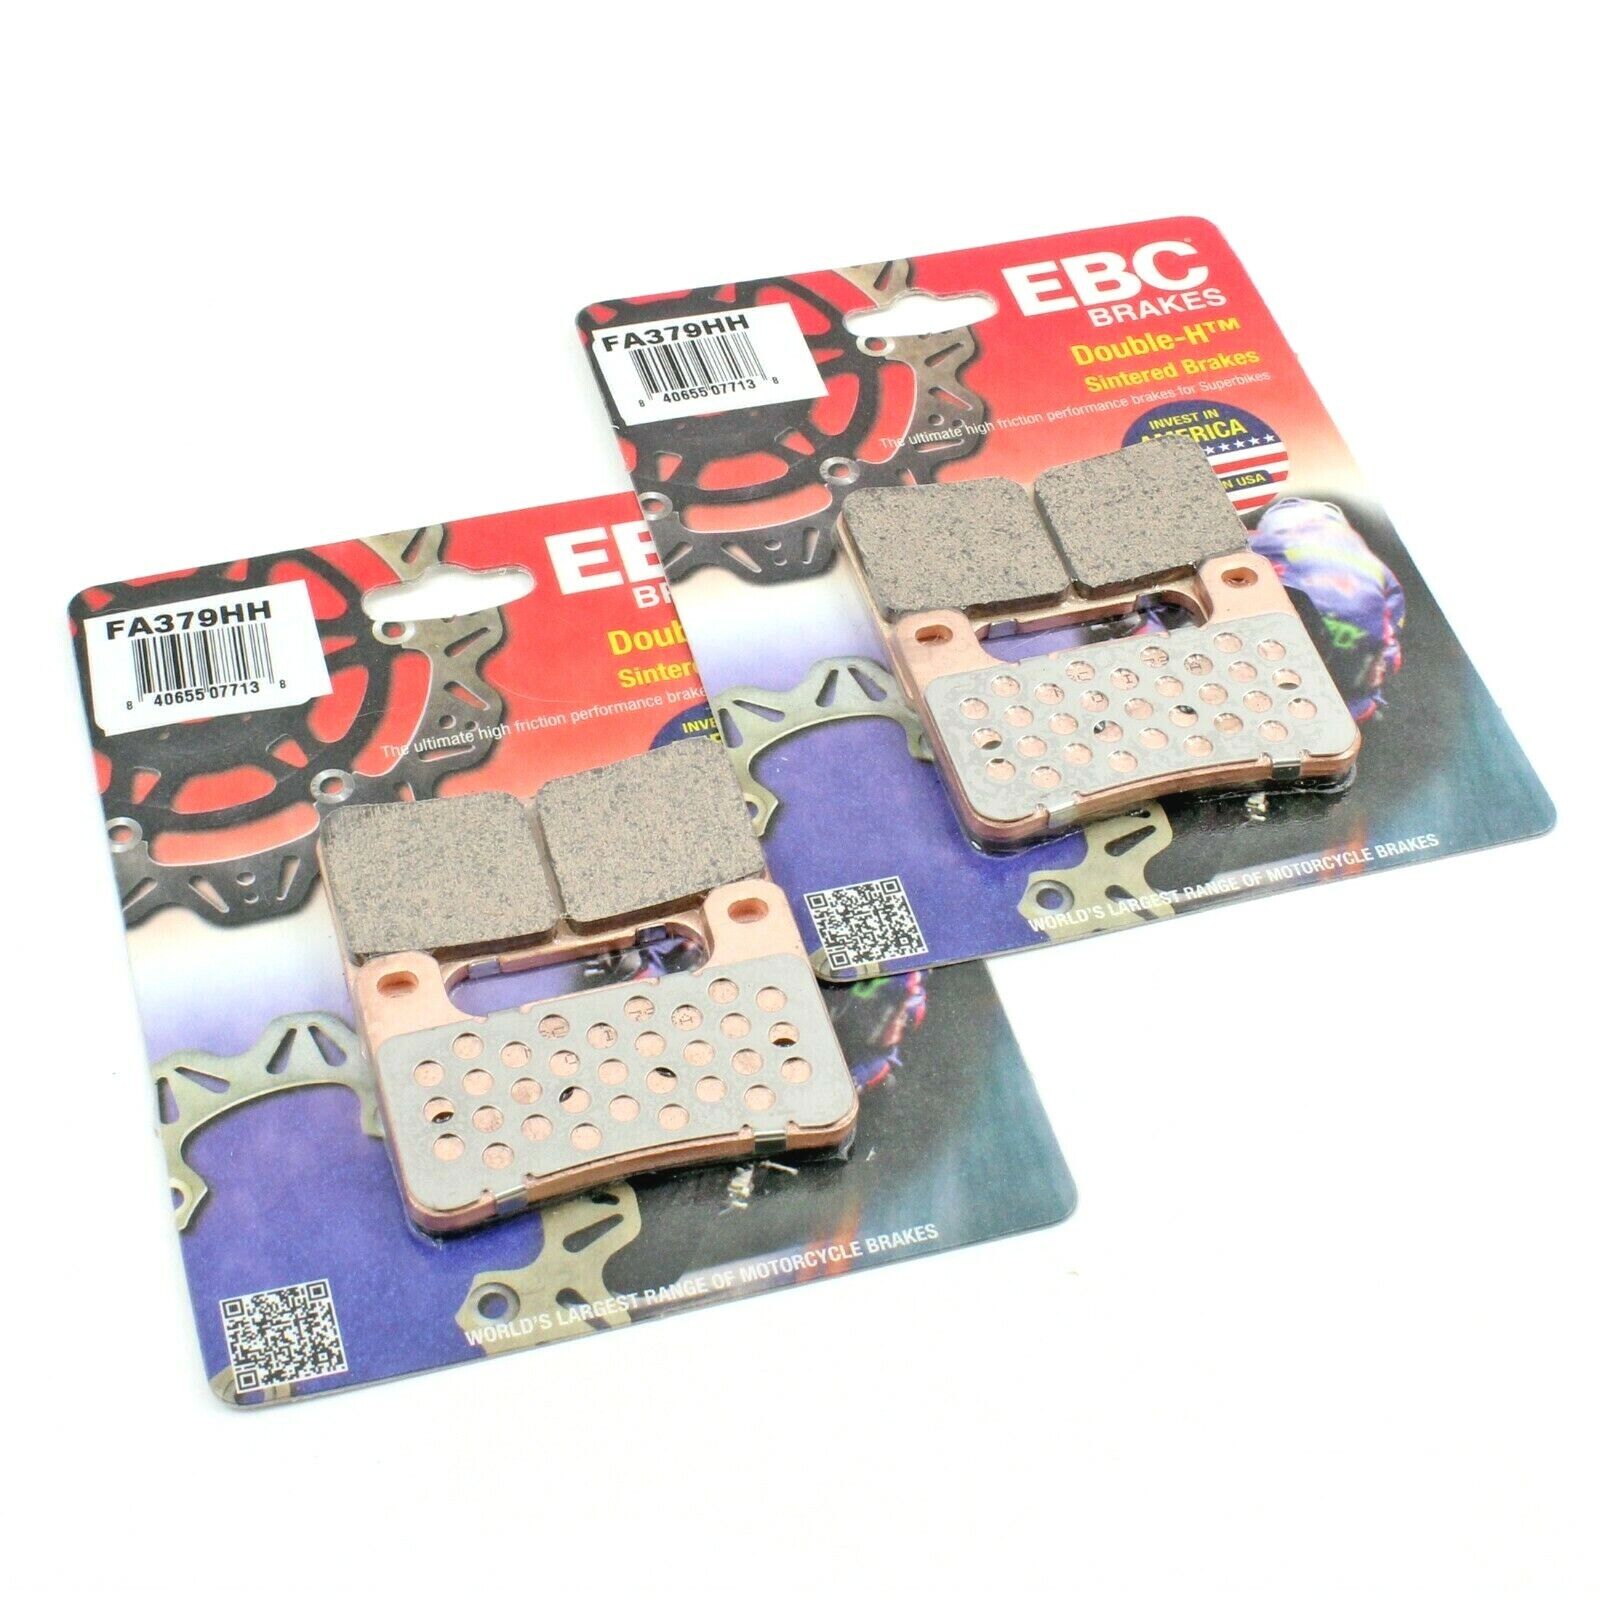 EBC Brake Pads FA379HH - HH Sintered Pads for Motorcycle - 2 Pairs